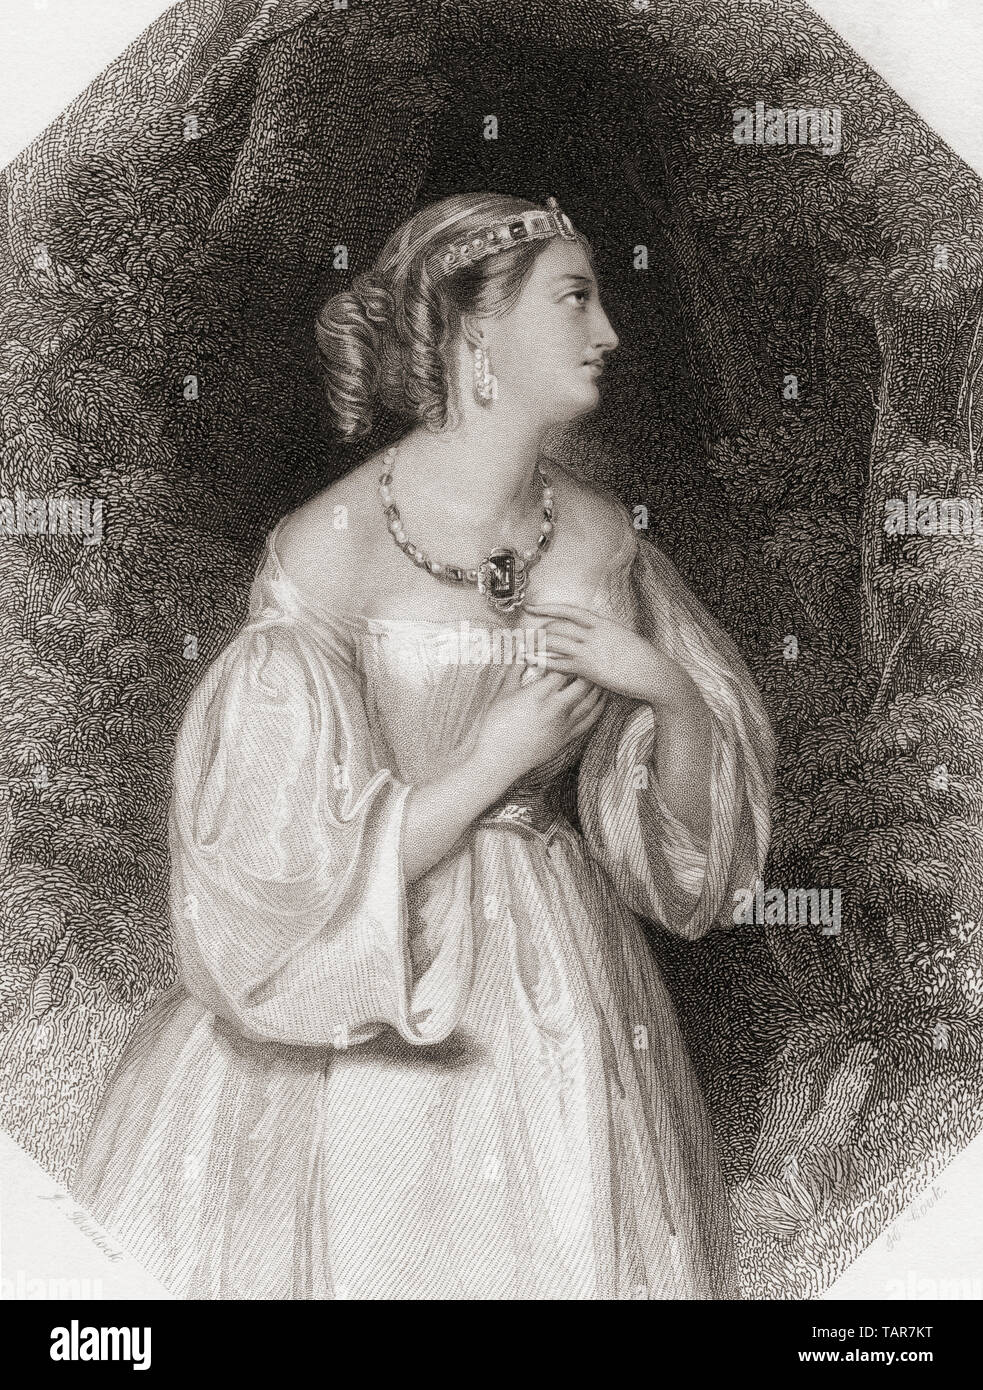 Lavinia.  Principal female character from Shakespeare's play Titus Andronicus.  From Shakespeare Gallery, published c.1840. Stock Photo